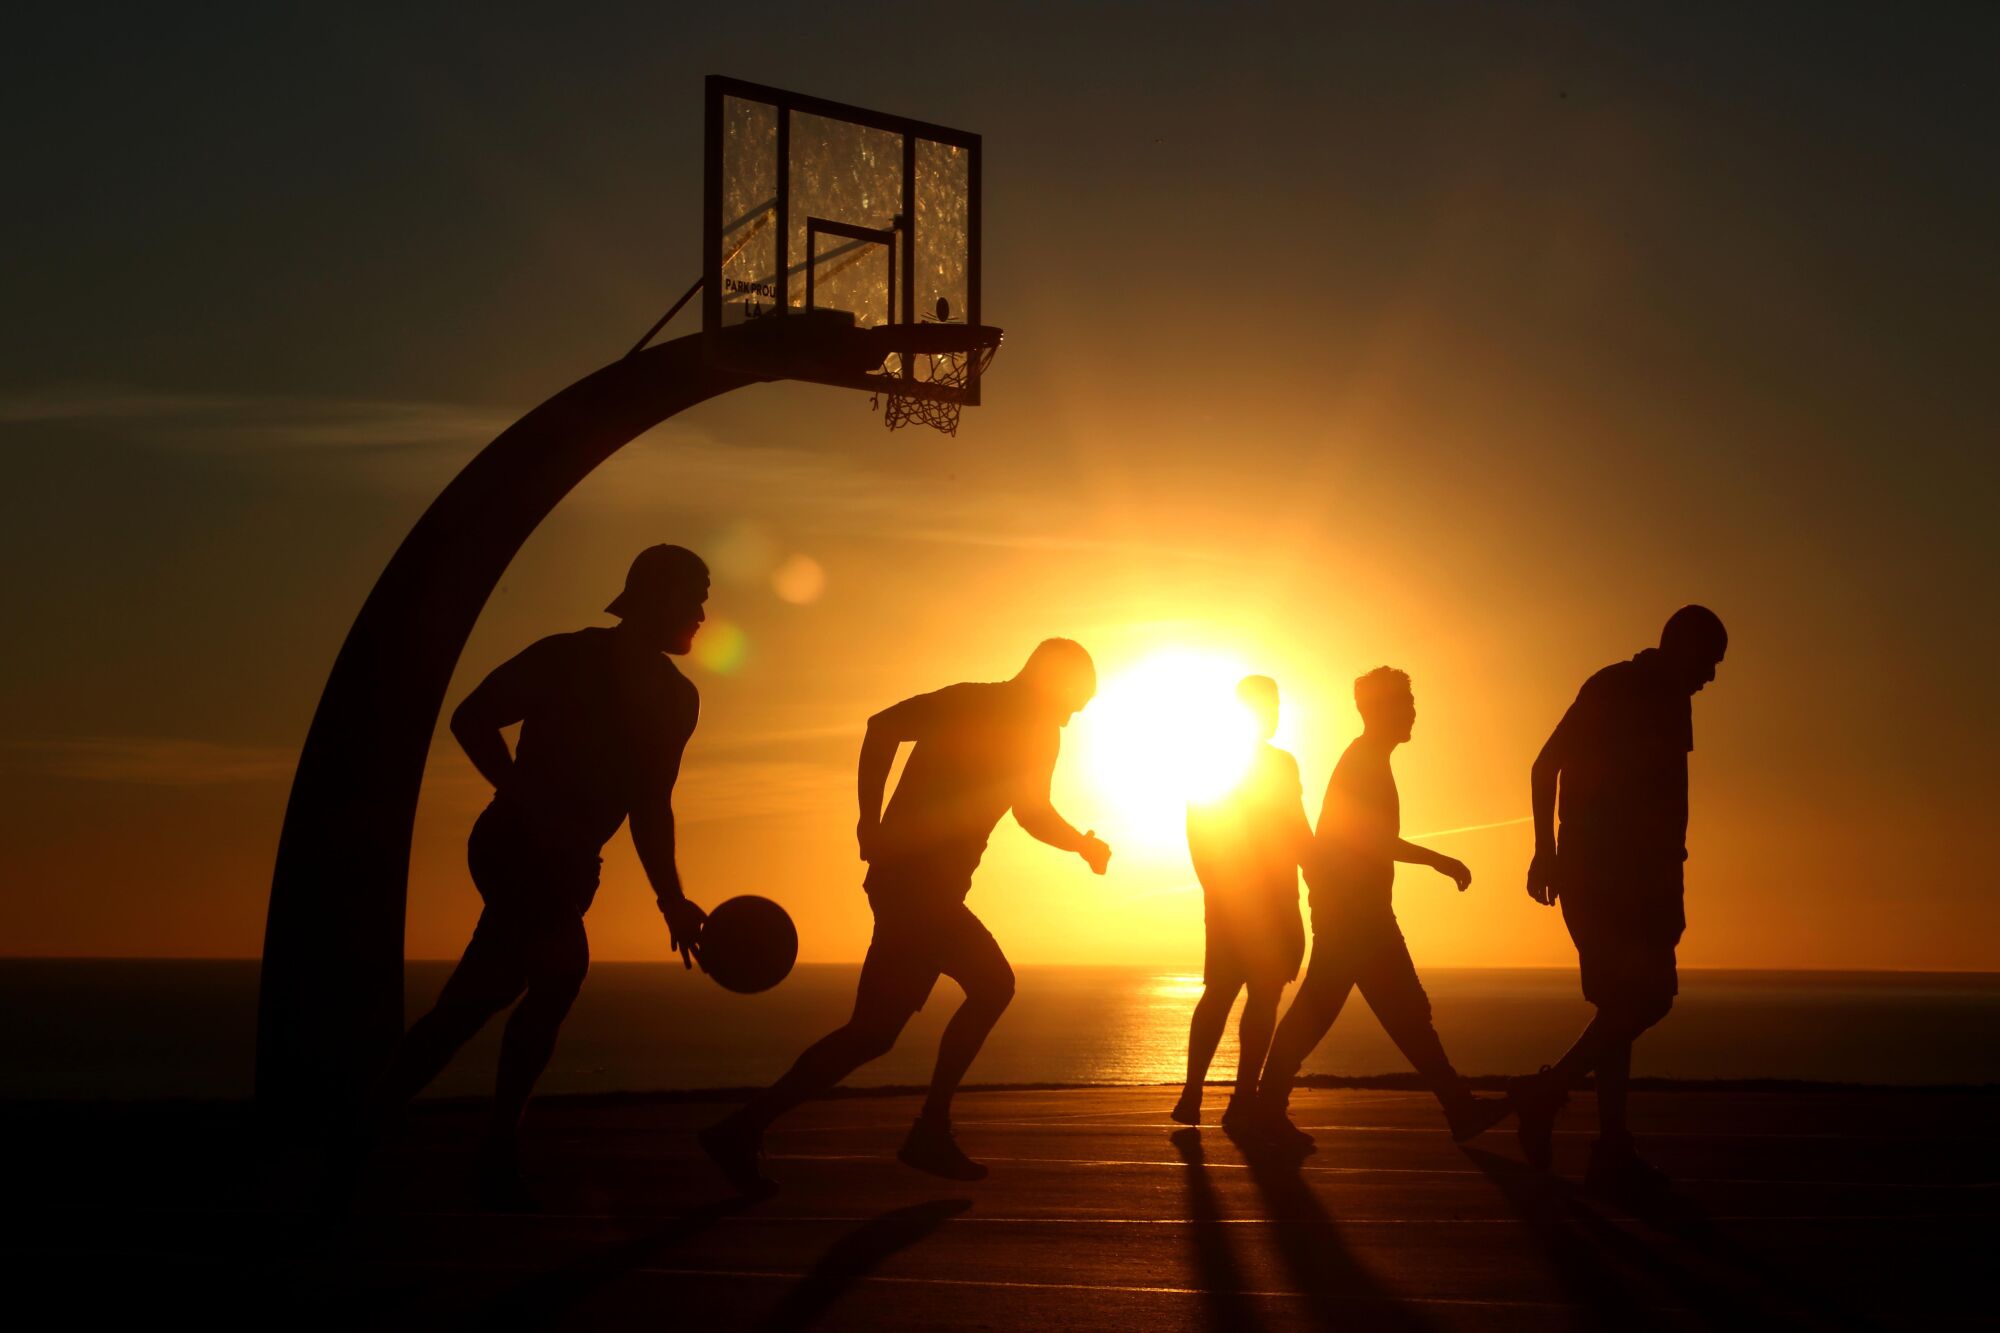 Basketball players are silhouetted against a setting sun 